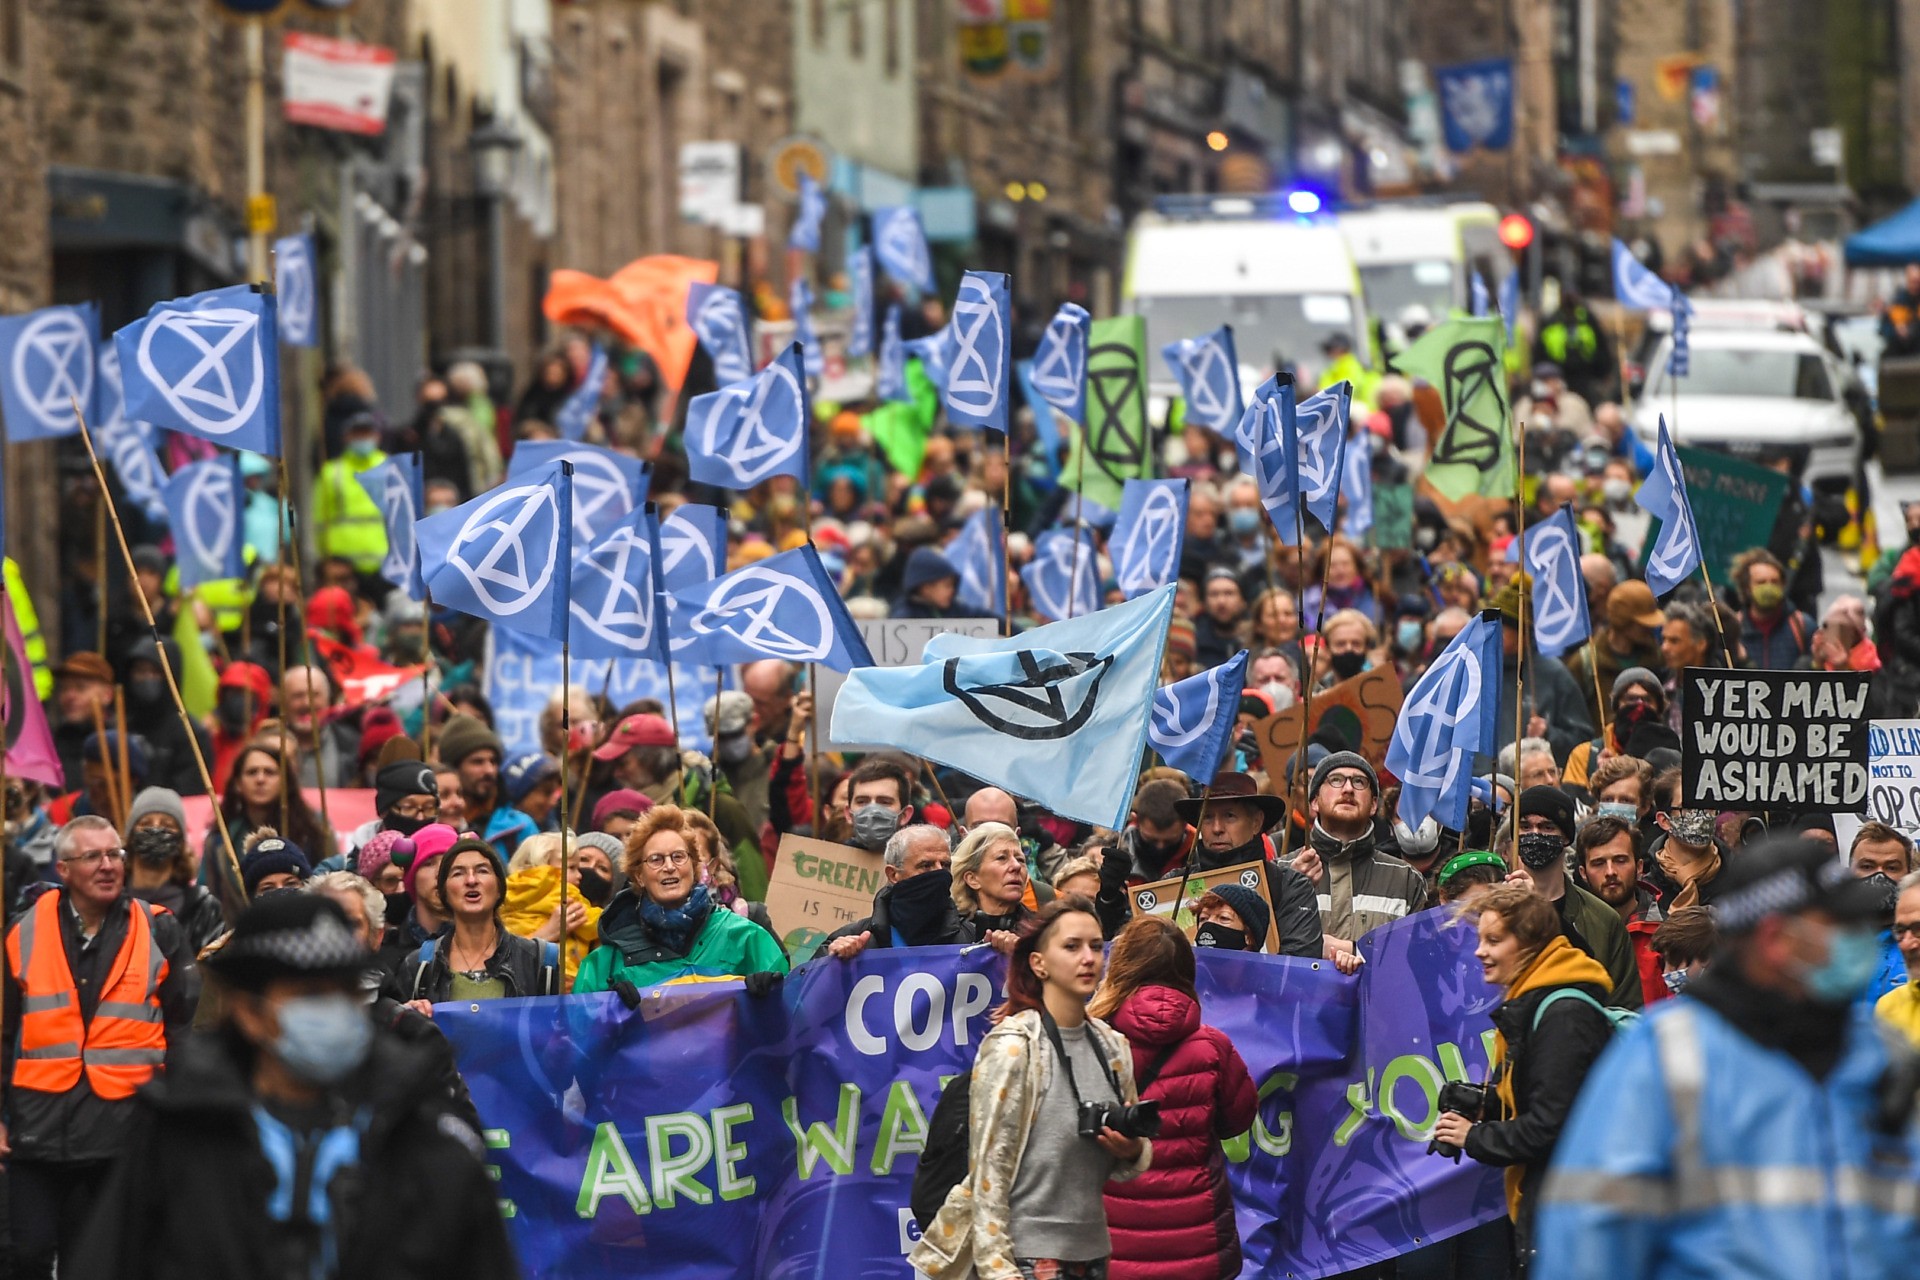 EDINBURGH, SCOTLAND - OCTOBER 31: Activists of the Extinction Rebellion protested on 31 October 2021 in Edinburgh, UK.  As world leaders meet to discuss climate change at the COP26 summit, a number of climate action groups have protested against real progress by governments in reducing carbon emissions, cleaning the oceans, reducing fossil fuel consumption and other climate change issues.  on global warming.  (Photo: Peter Summers / Getty Images)